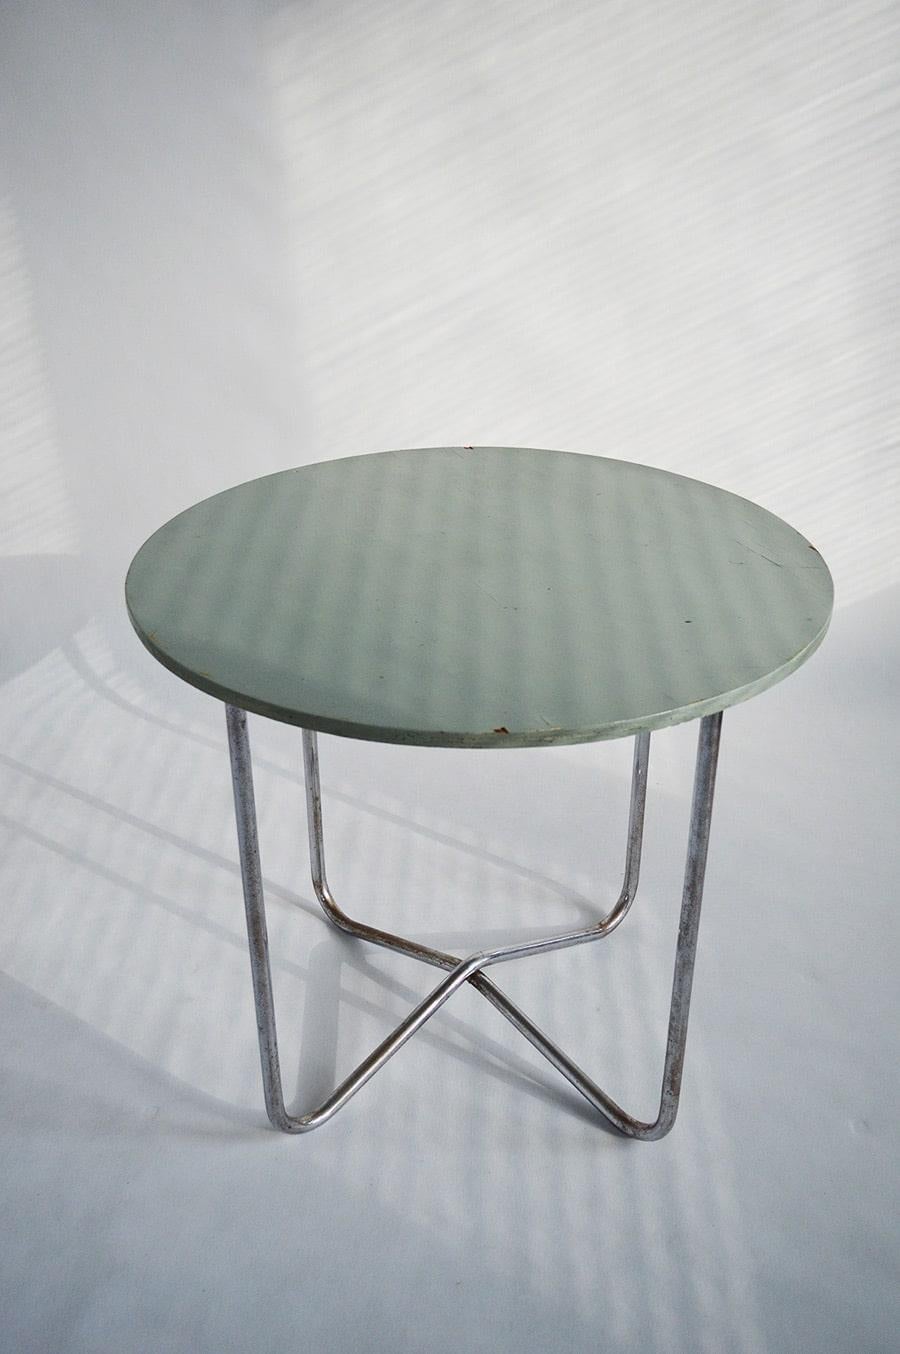 A fabulous Bauhaus round tubular steel table, in good original condition, designed by Hynek Gottwald in the 1930s.

This table, besides having a beautiful patina also has a unique original gray-green color called Xanadu.
This table is incredibly